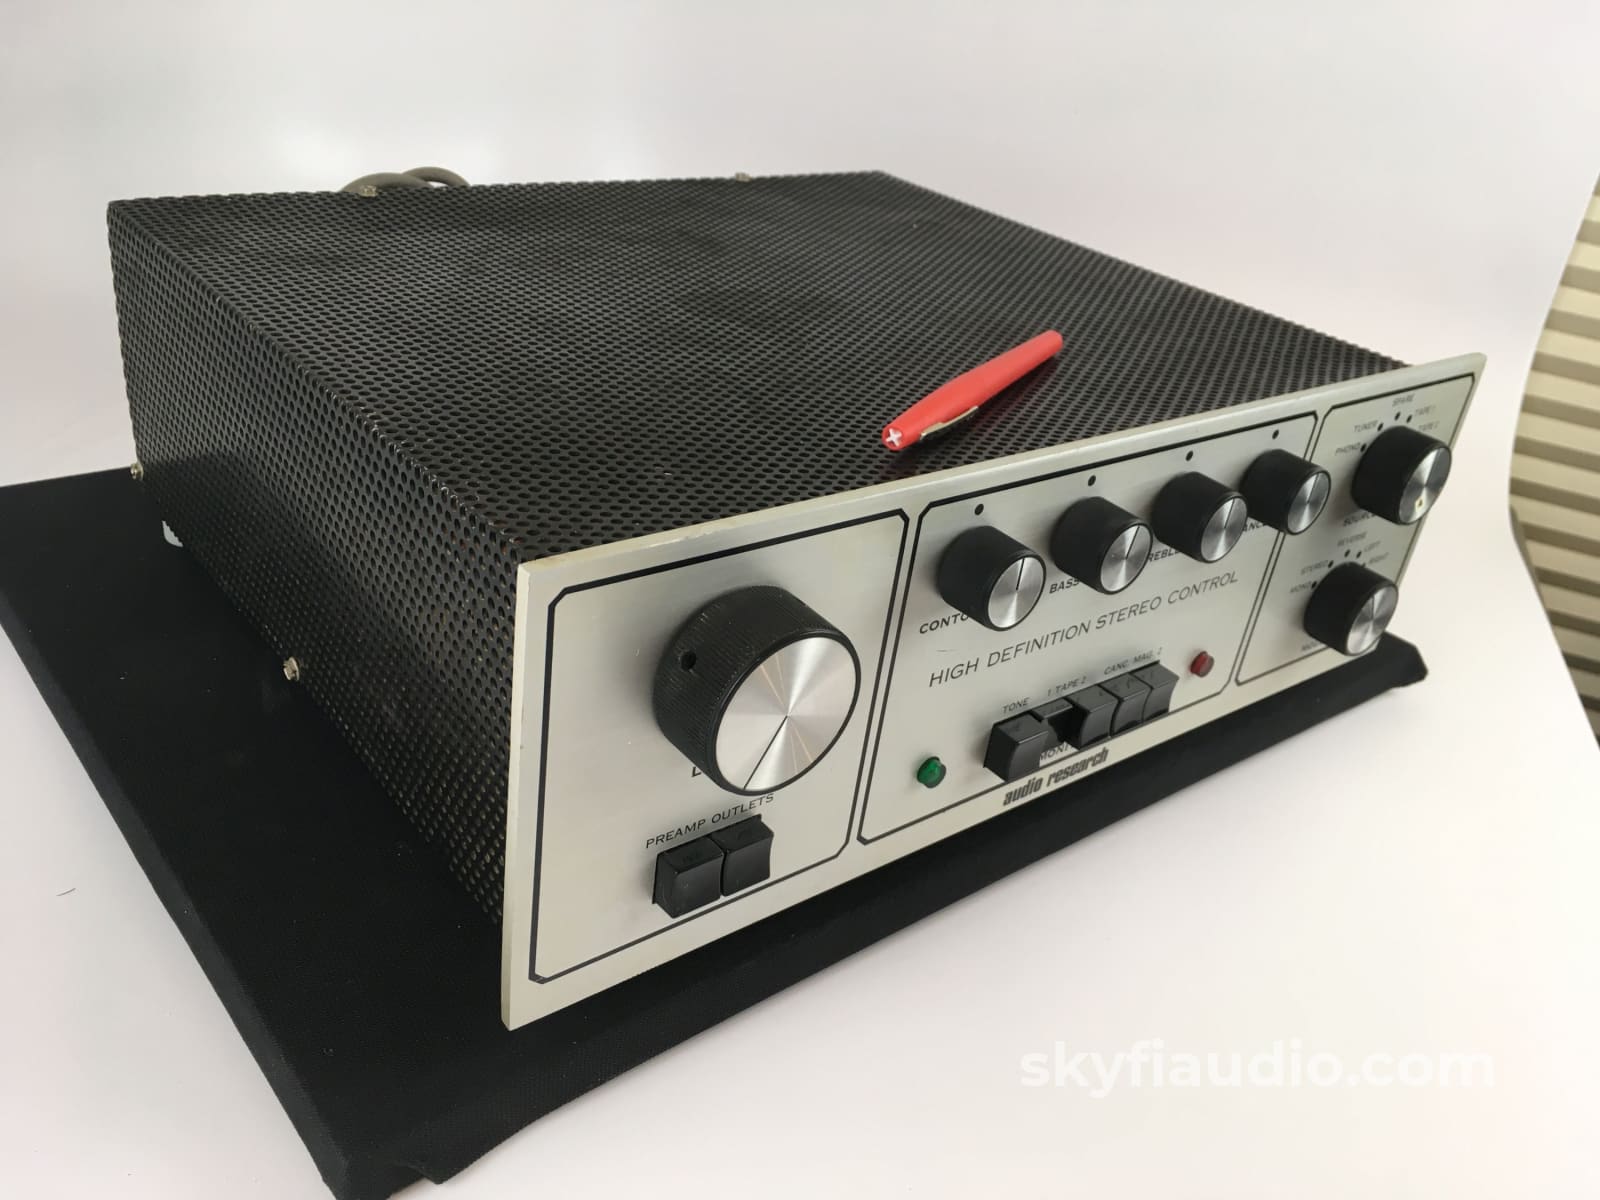 Audio Research Sp-3A-1 Tube Preamplifier - Restored